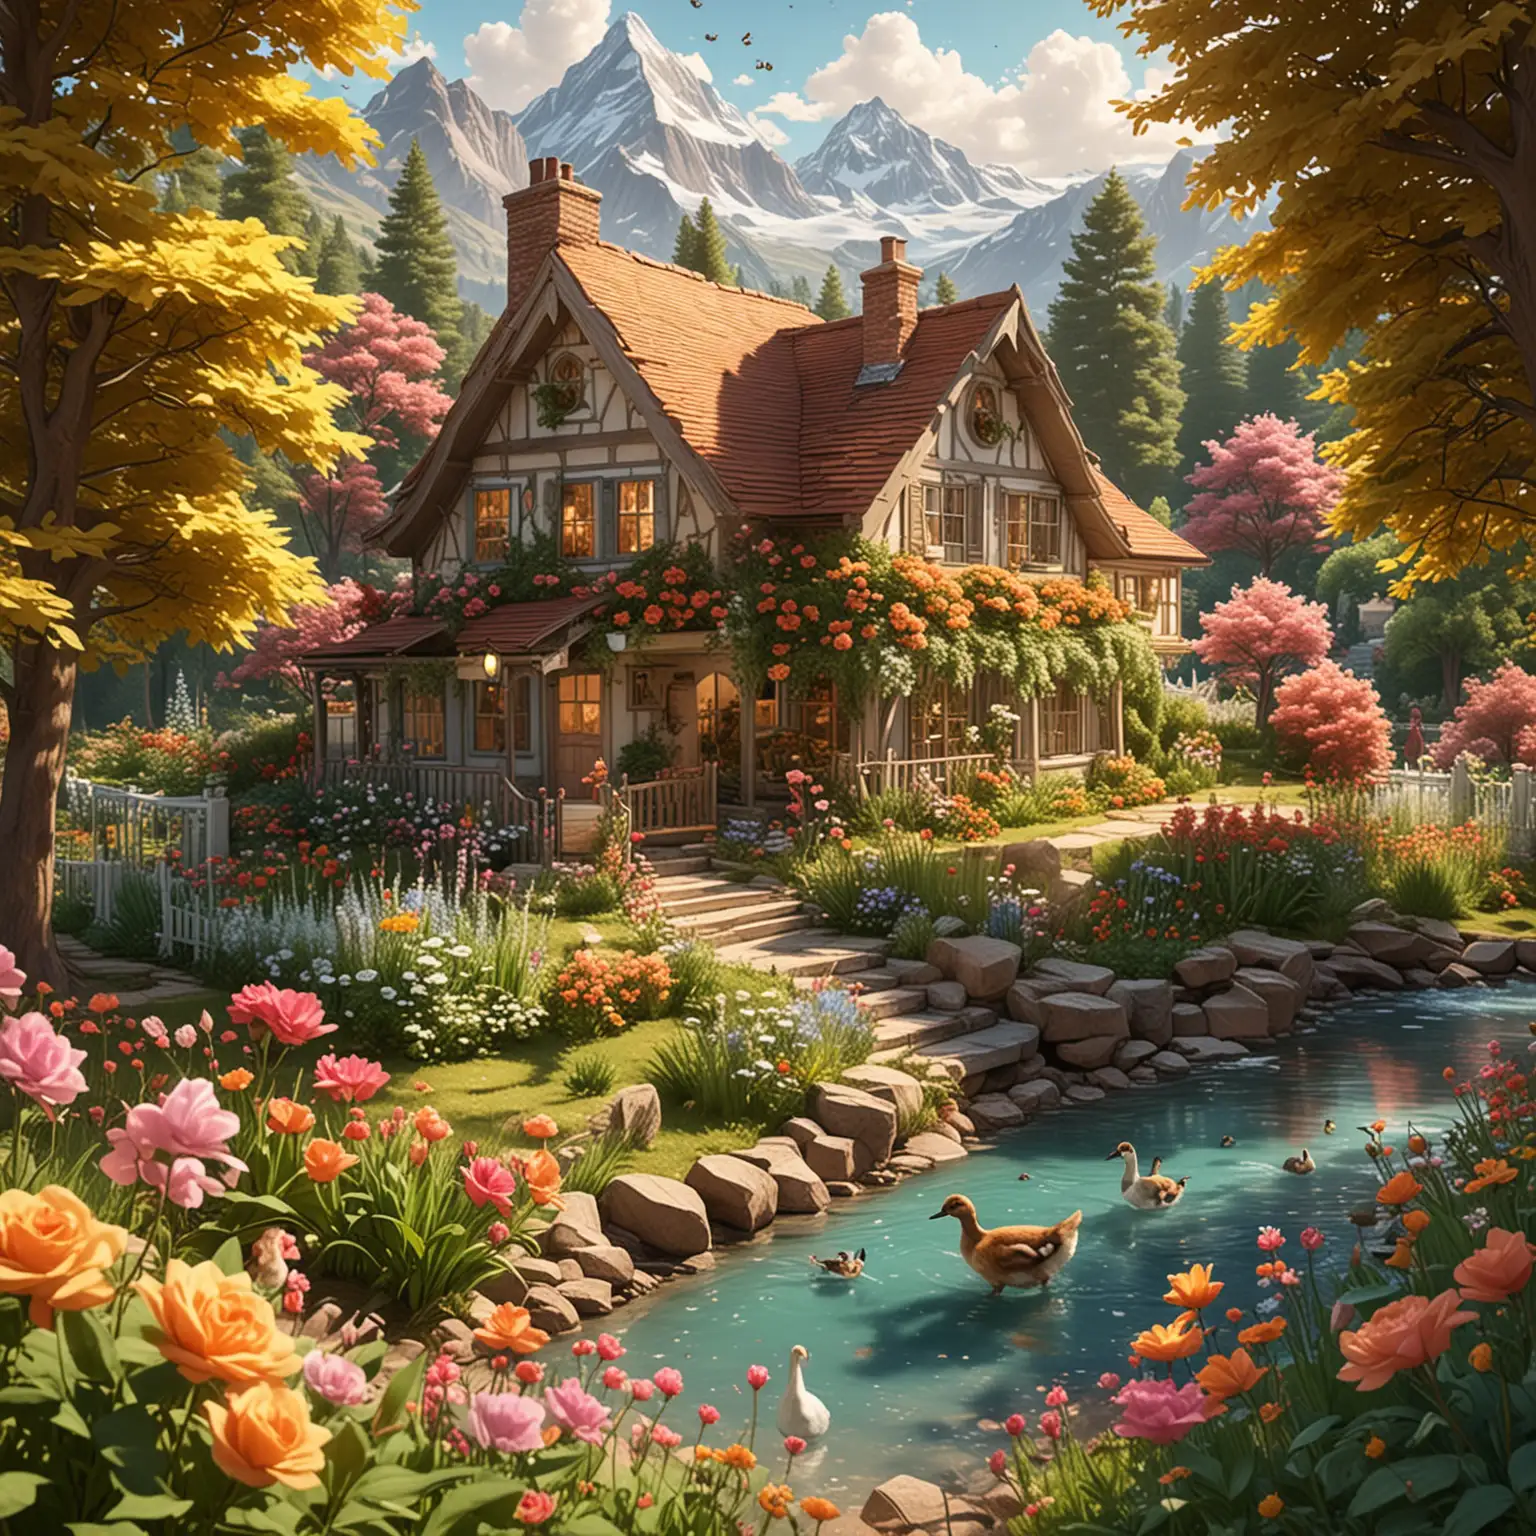 "Eevee building a cozy house by a sparkling river flowing from a majestic, ice-capped mountain, surrounded by high and low peaks. The house is nestled in a vibrant forest filled with flowers like roses and mushrooms. Busy bees buzz around, collecting nectar. A family of ducks leisurely swims on the river. The environment is filled with delightful scents and birdsong. Sunlight filters through the leaves, casting cool, comfy shadows over the house. Show the bees flying over the flowers in a close-up view, and a flock of geese flying in the sky.
